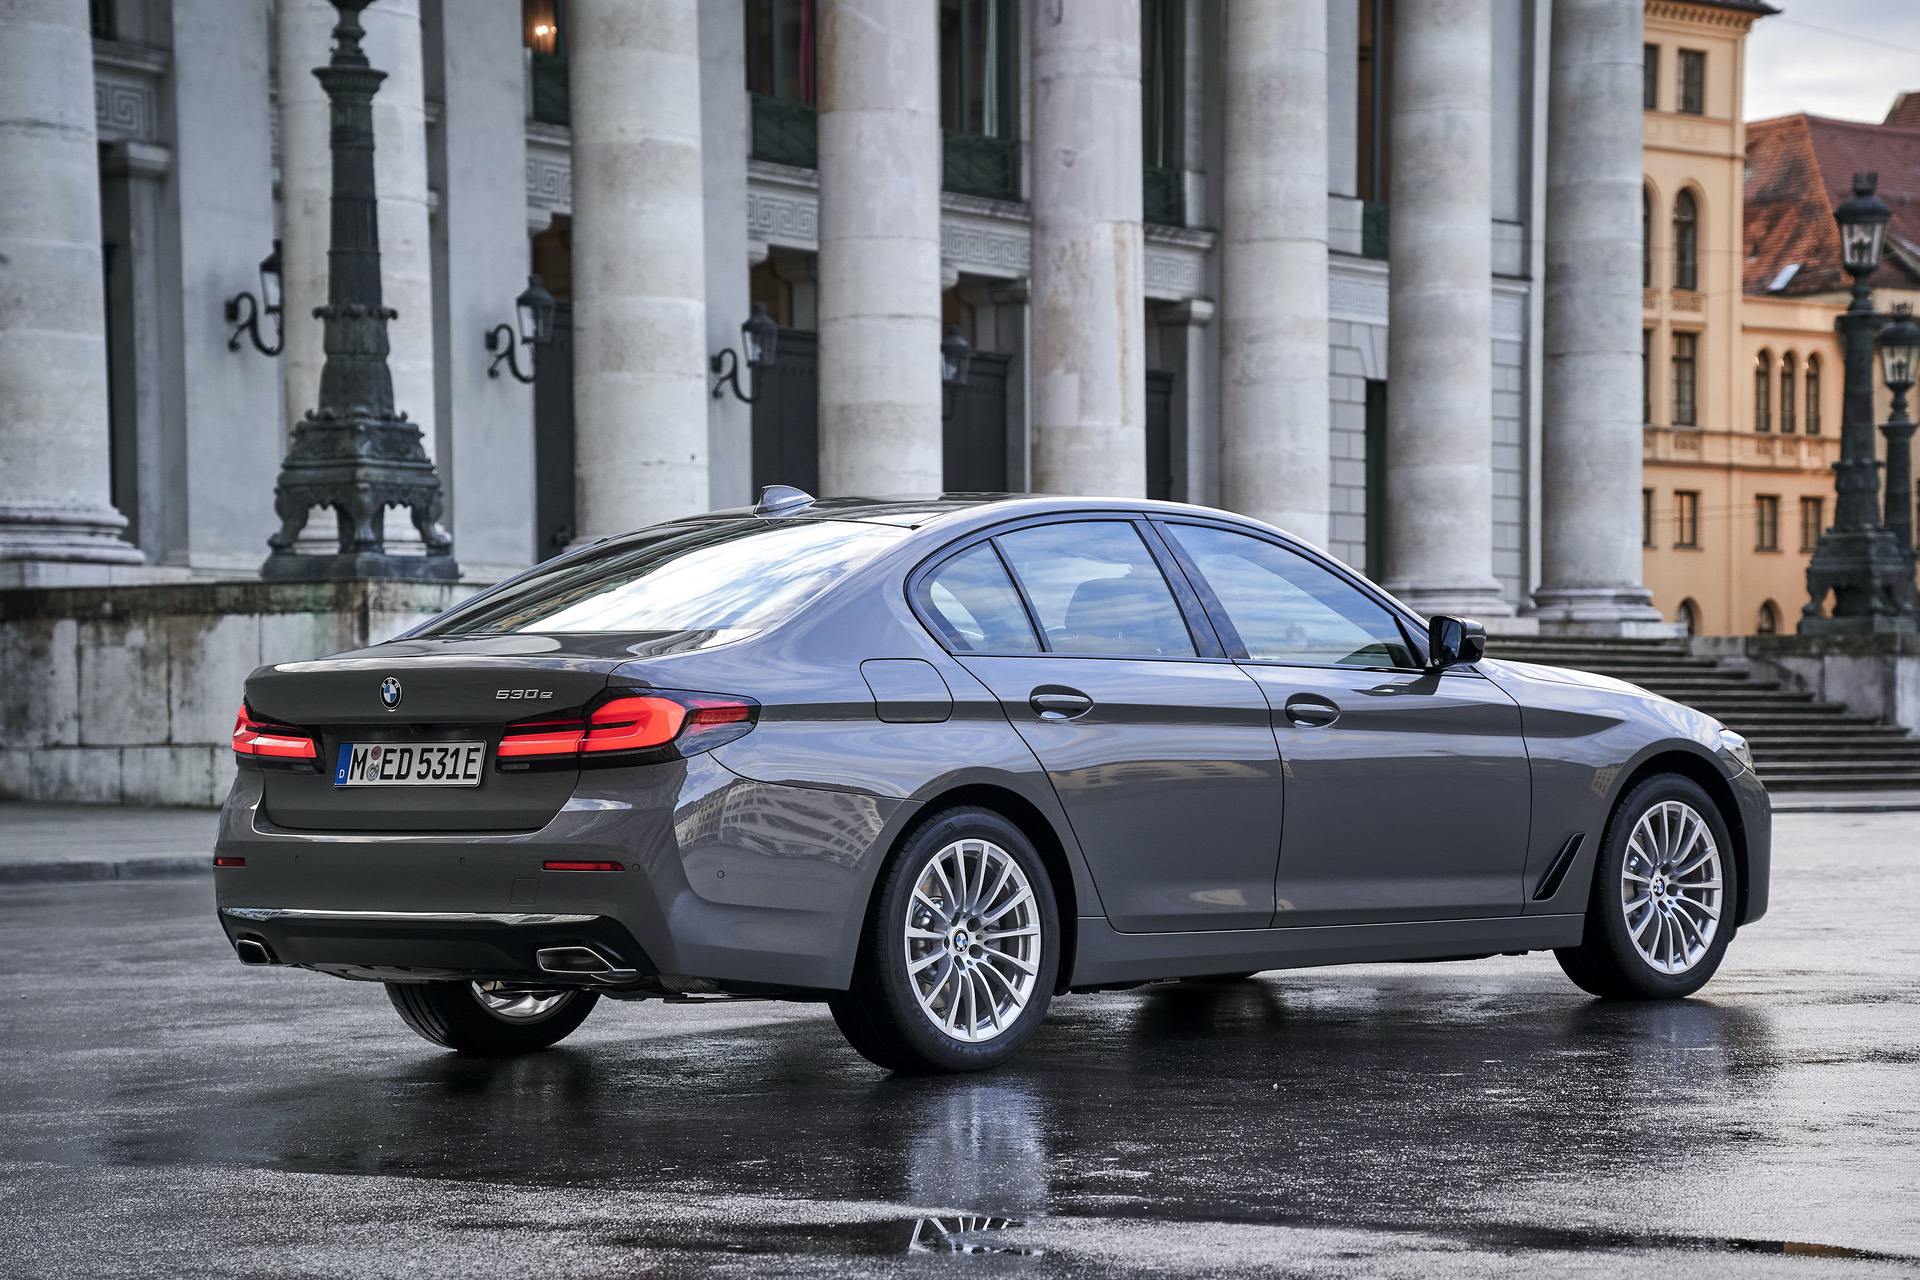 2021 BMW 530e Facelift - New Photo Gallery